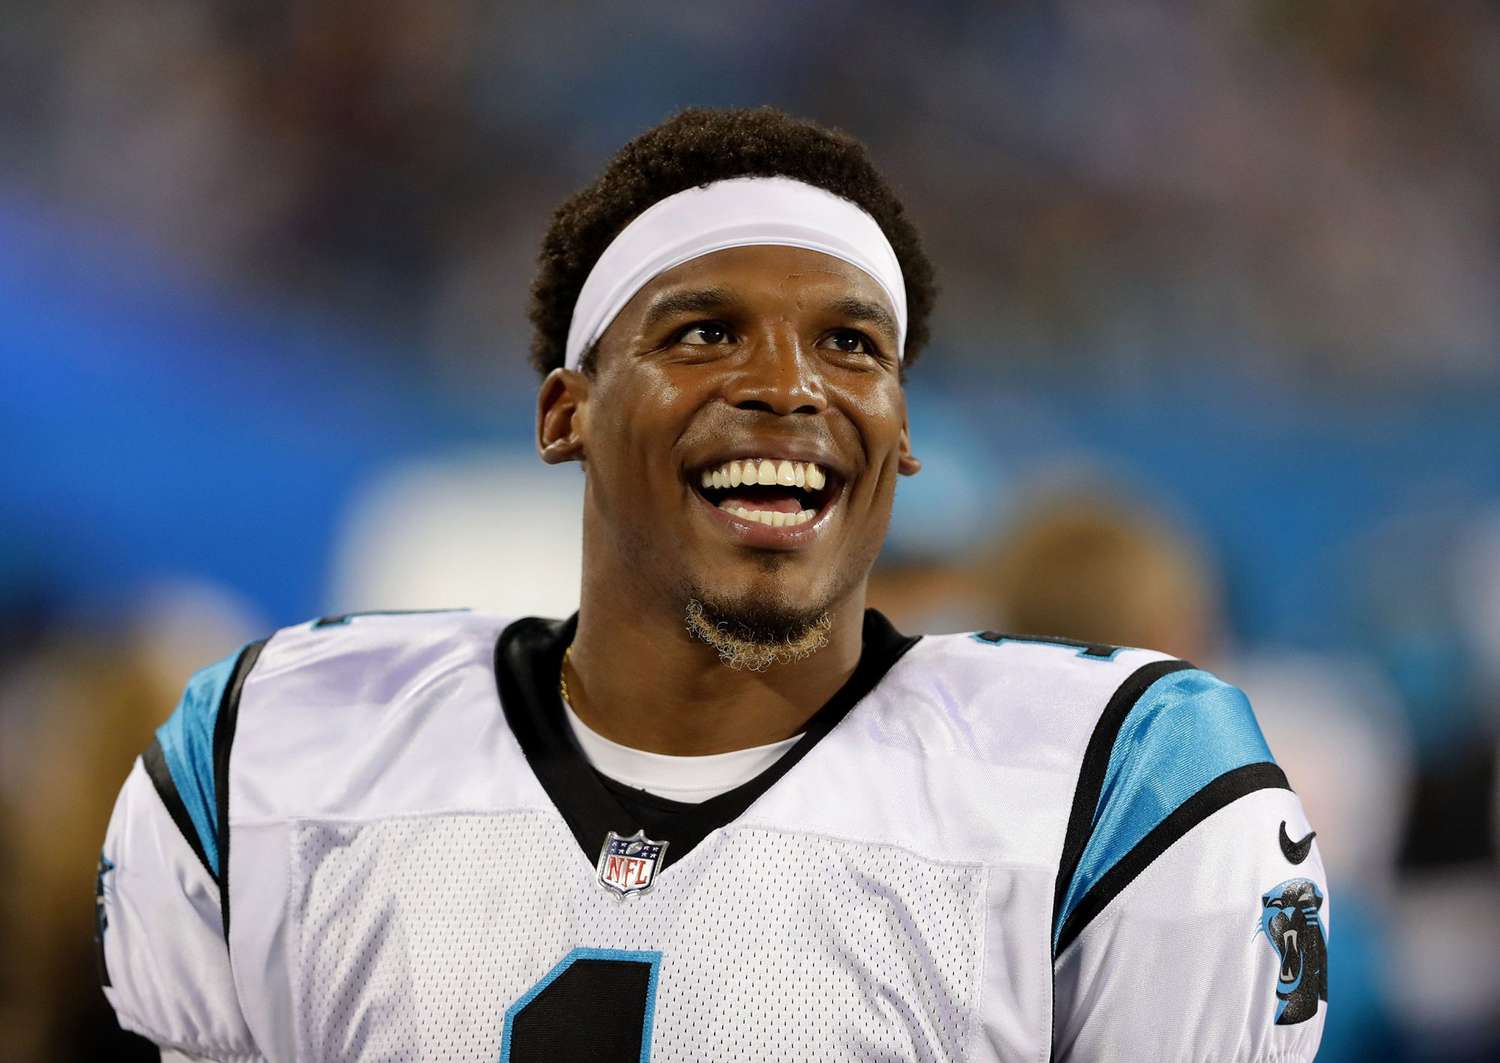 Cam Newton's Bold Move: Sticking With Youth Football Despite Recent Fight Drama